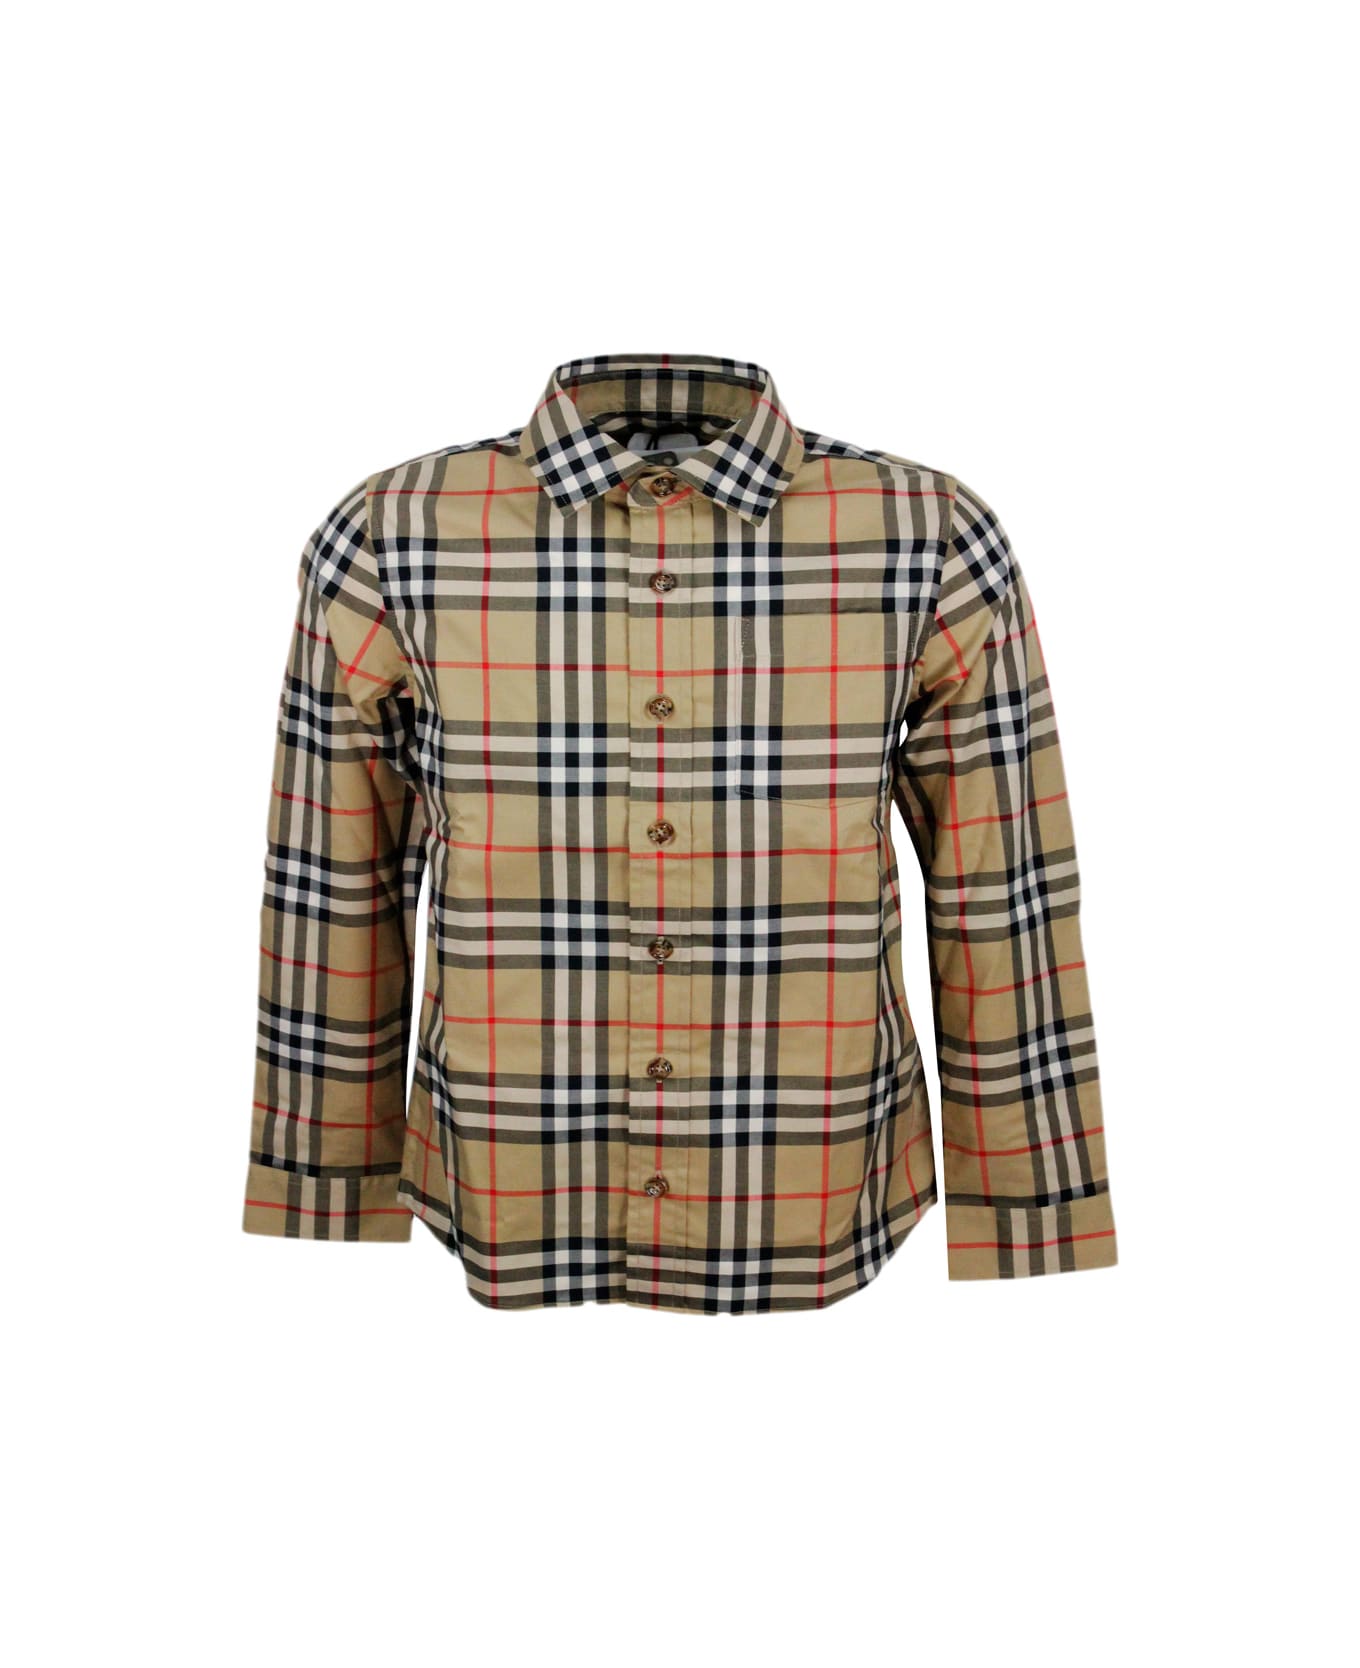 Burberry Stretch Cotton Twill Shirt With Patch Pocket On The Chest In A Vintage Check Pattern - Beige